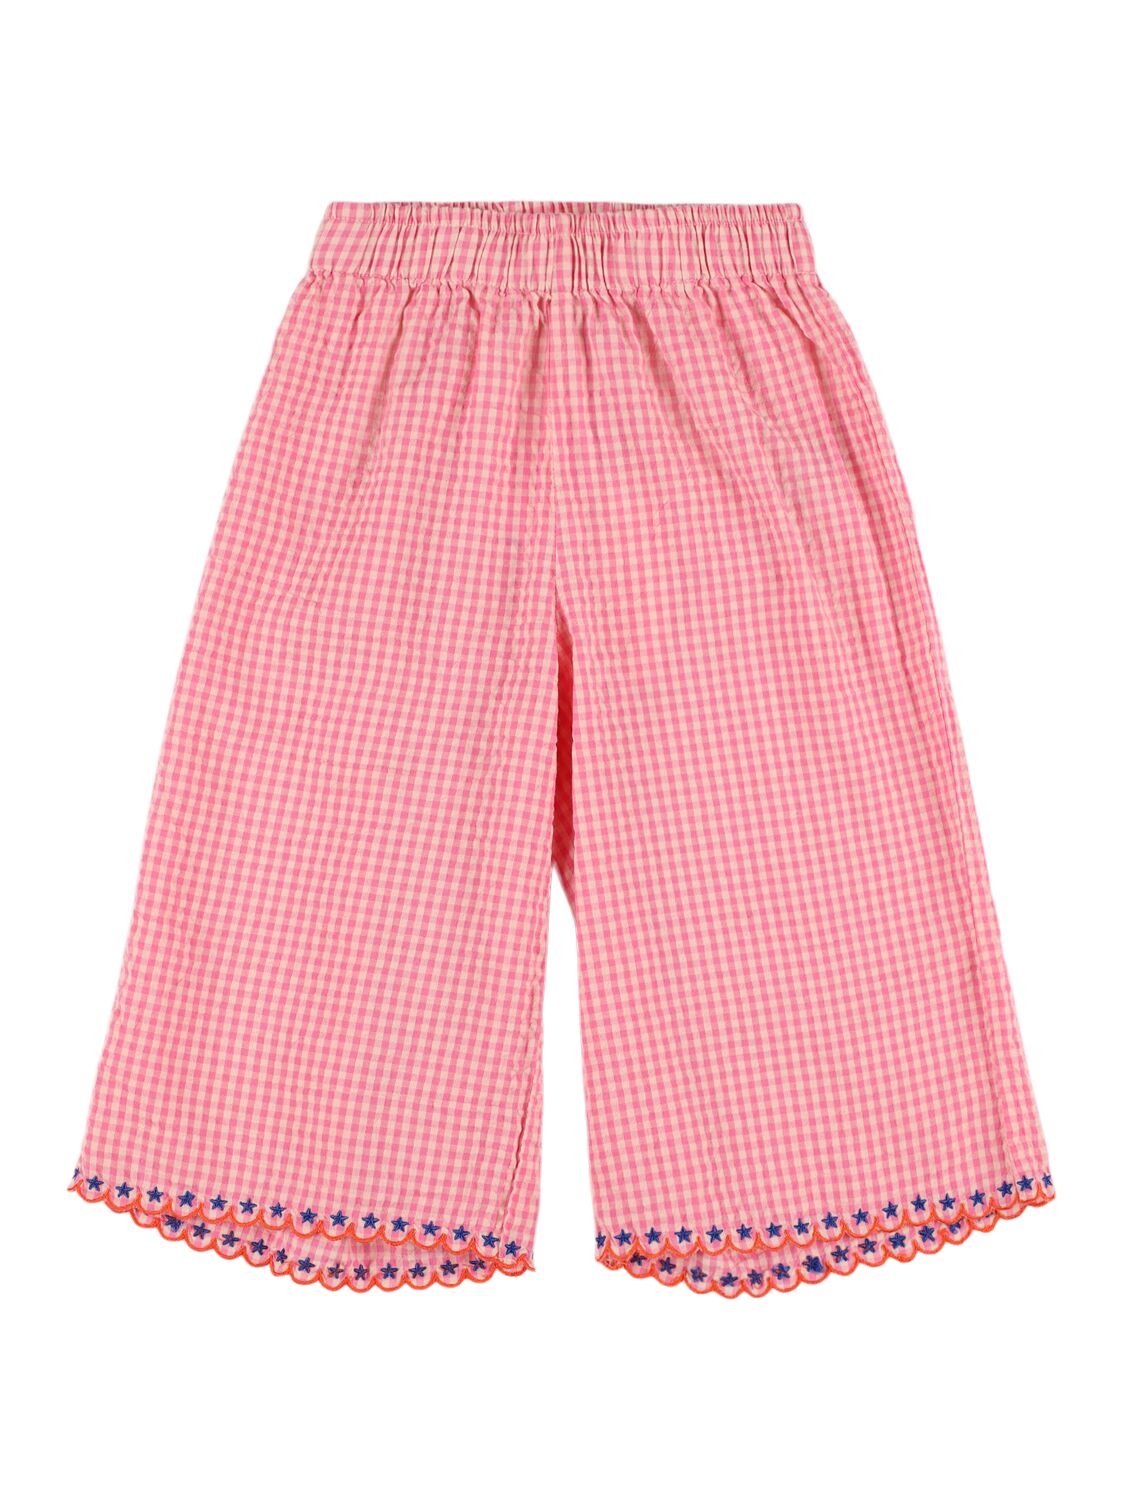 Tiny Cottons Kids' Cotton Gingham Pants In Pink